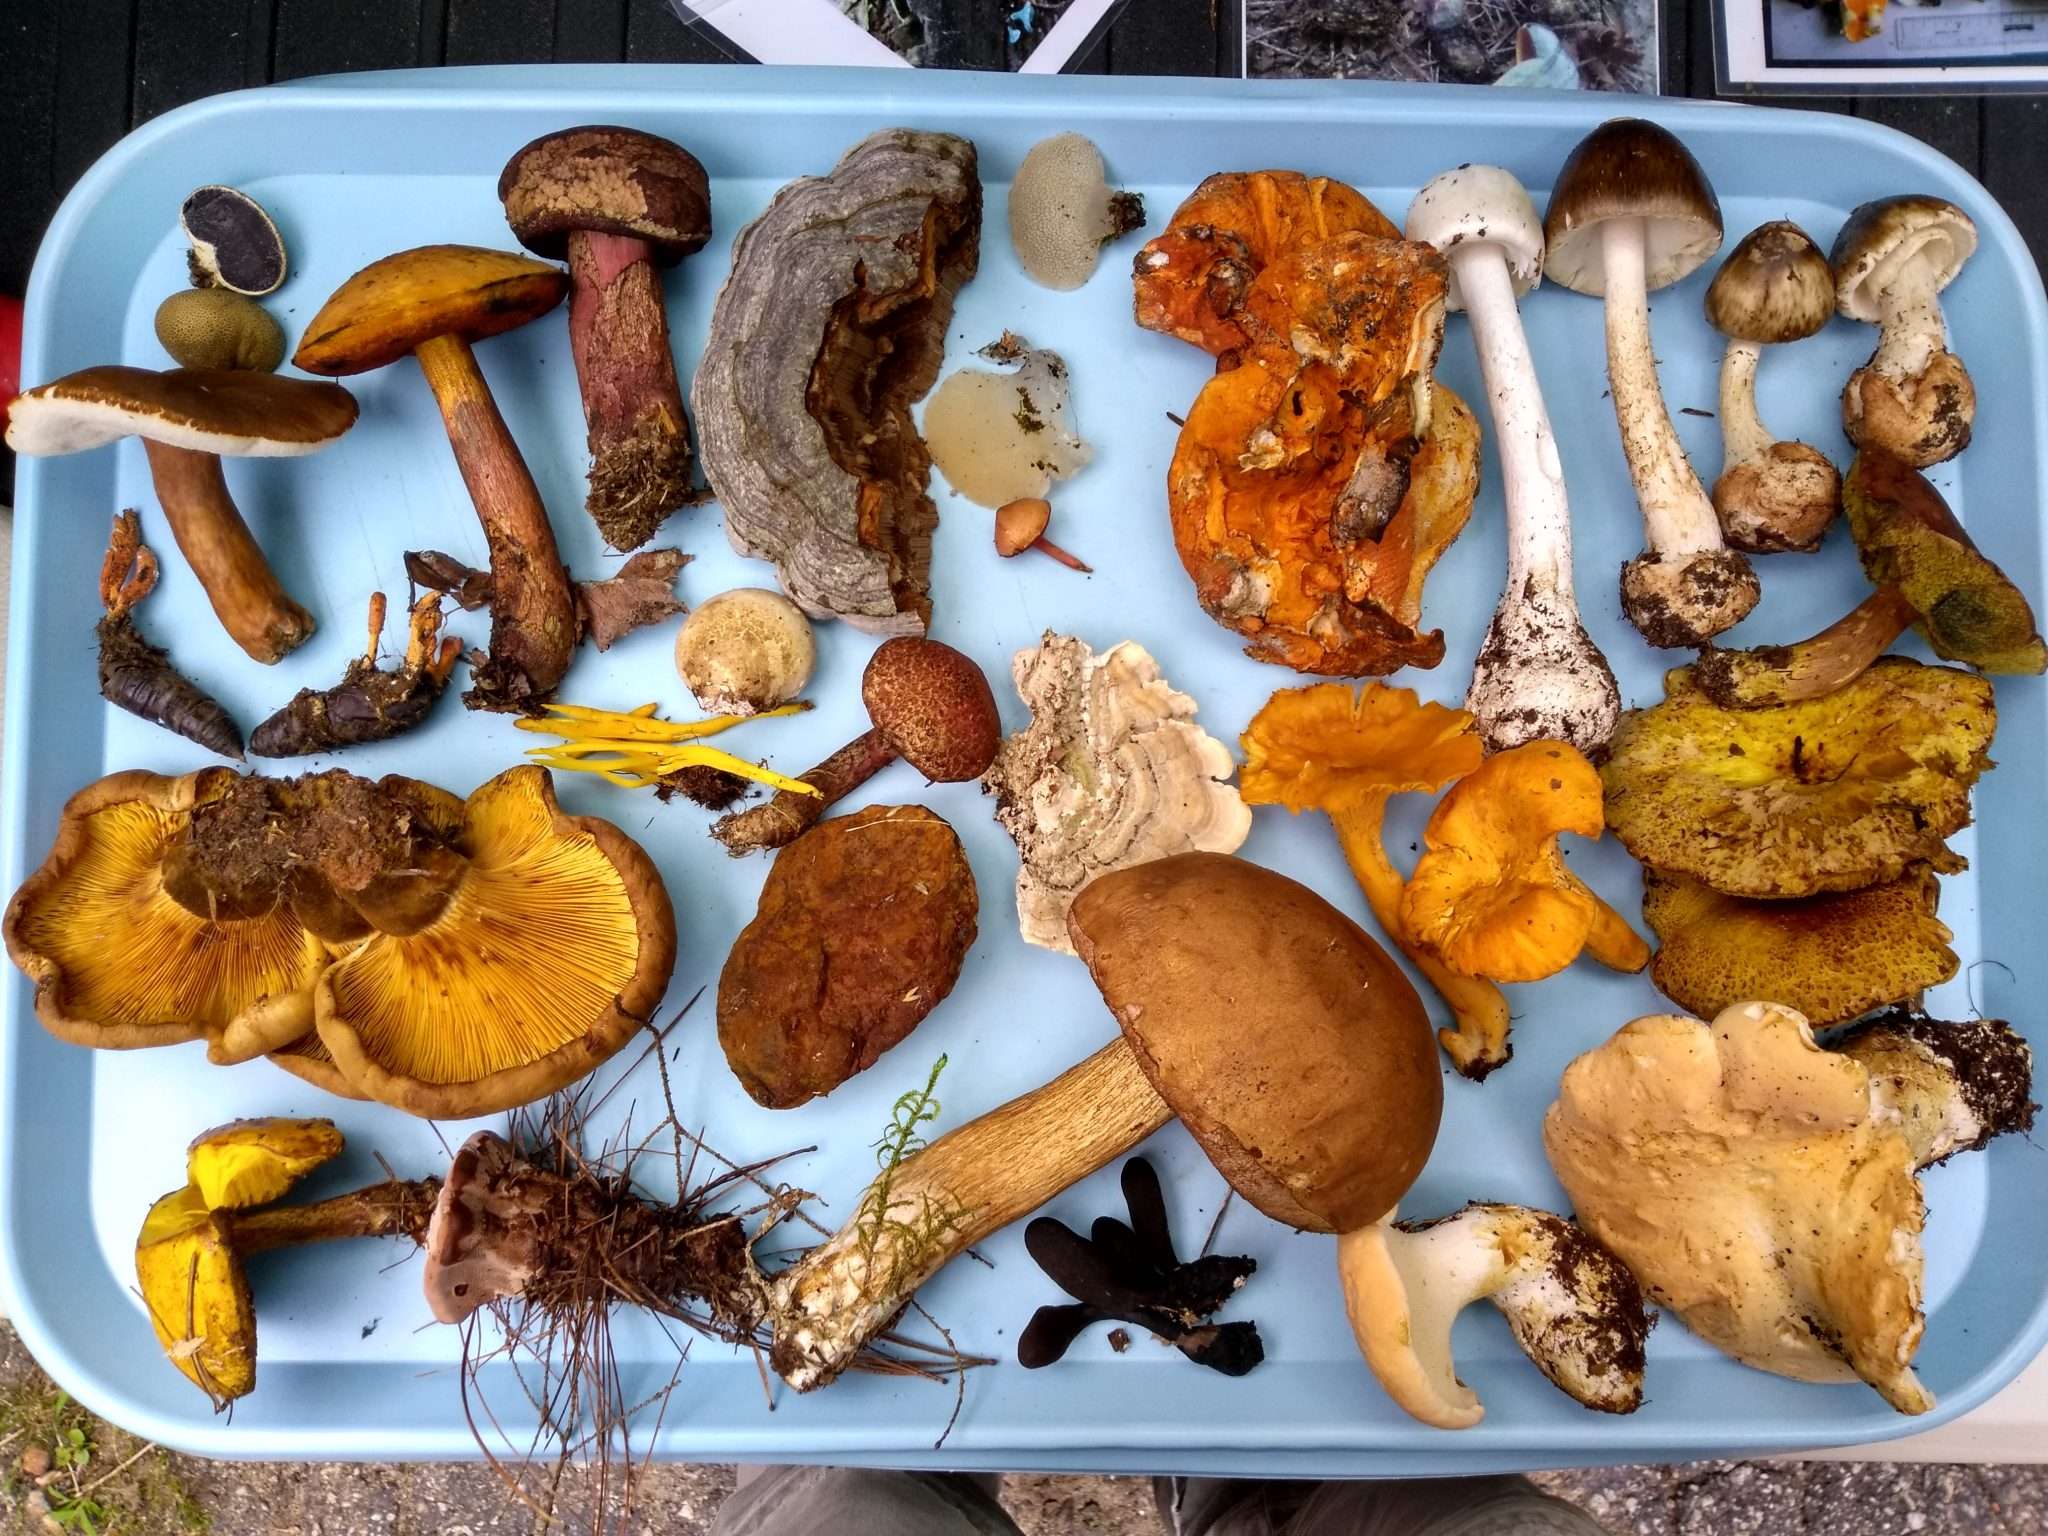 A blue tray full of brown, white and orange mushrooms.